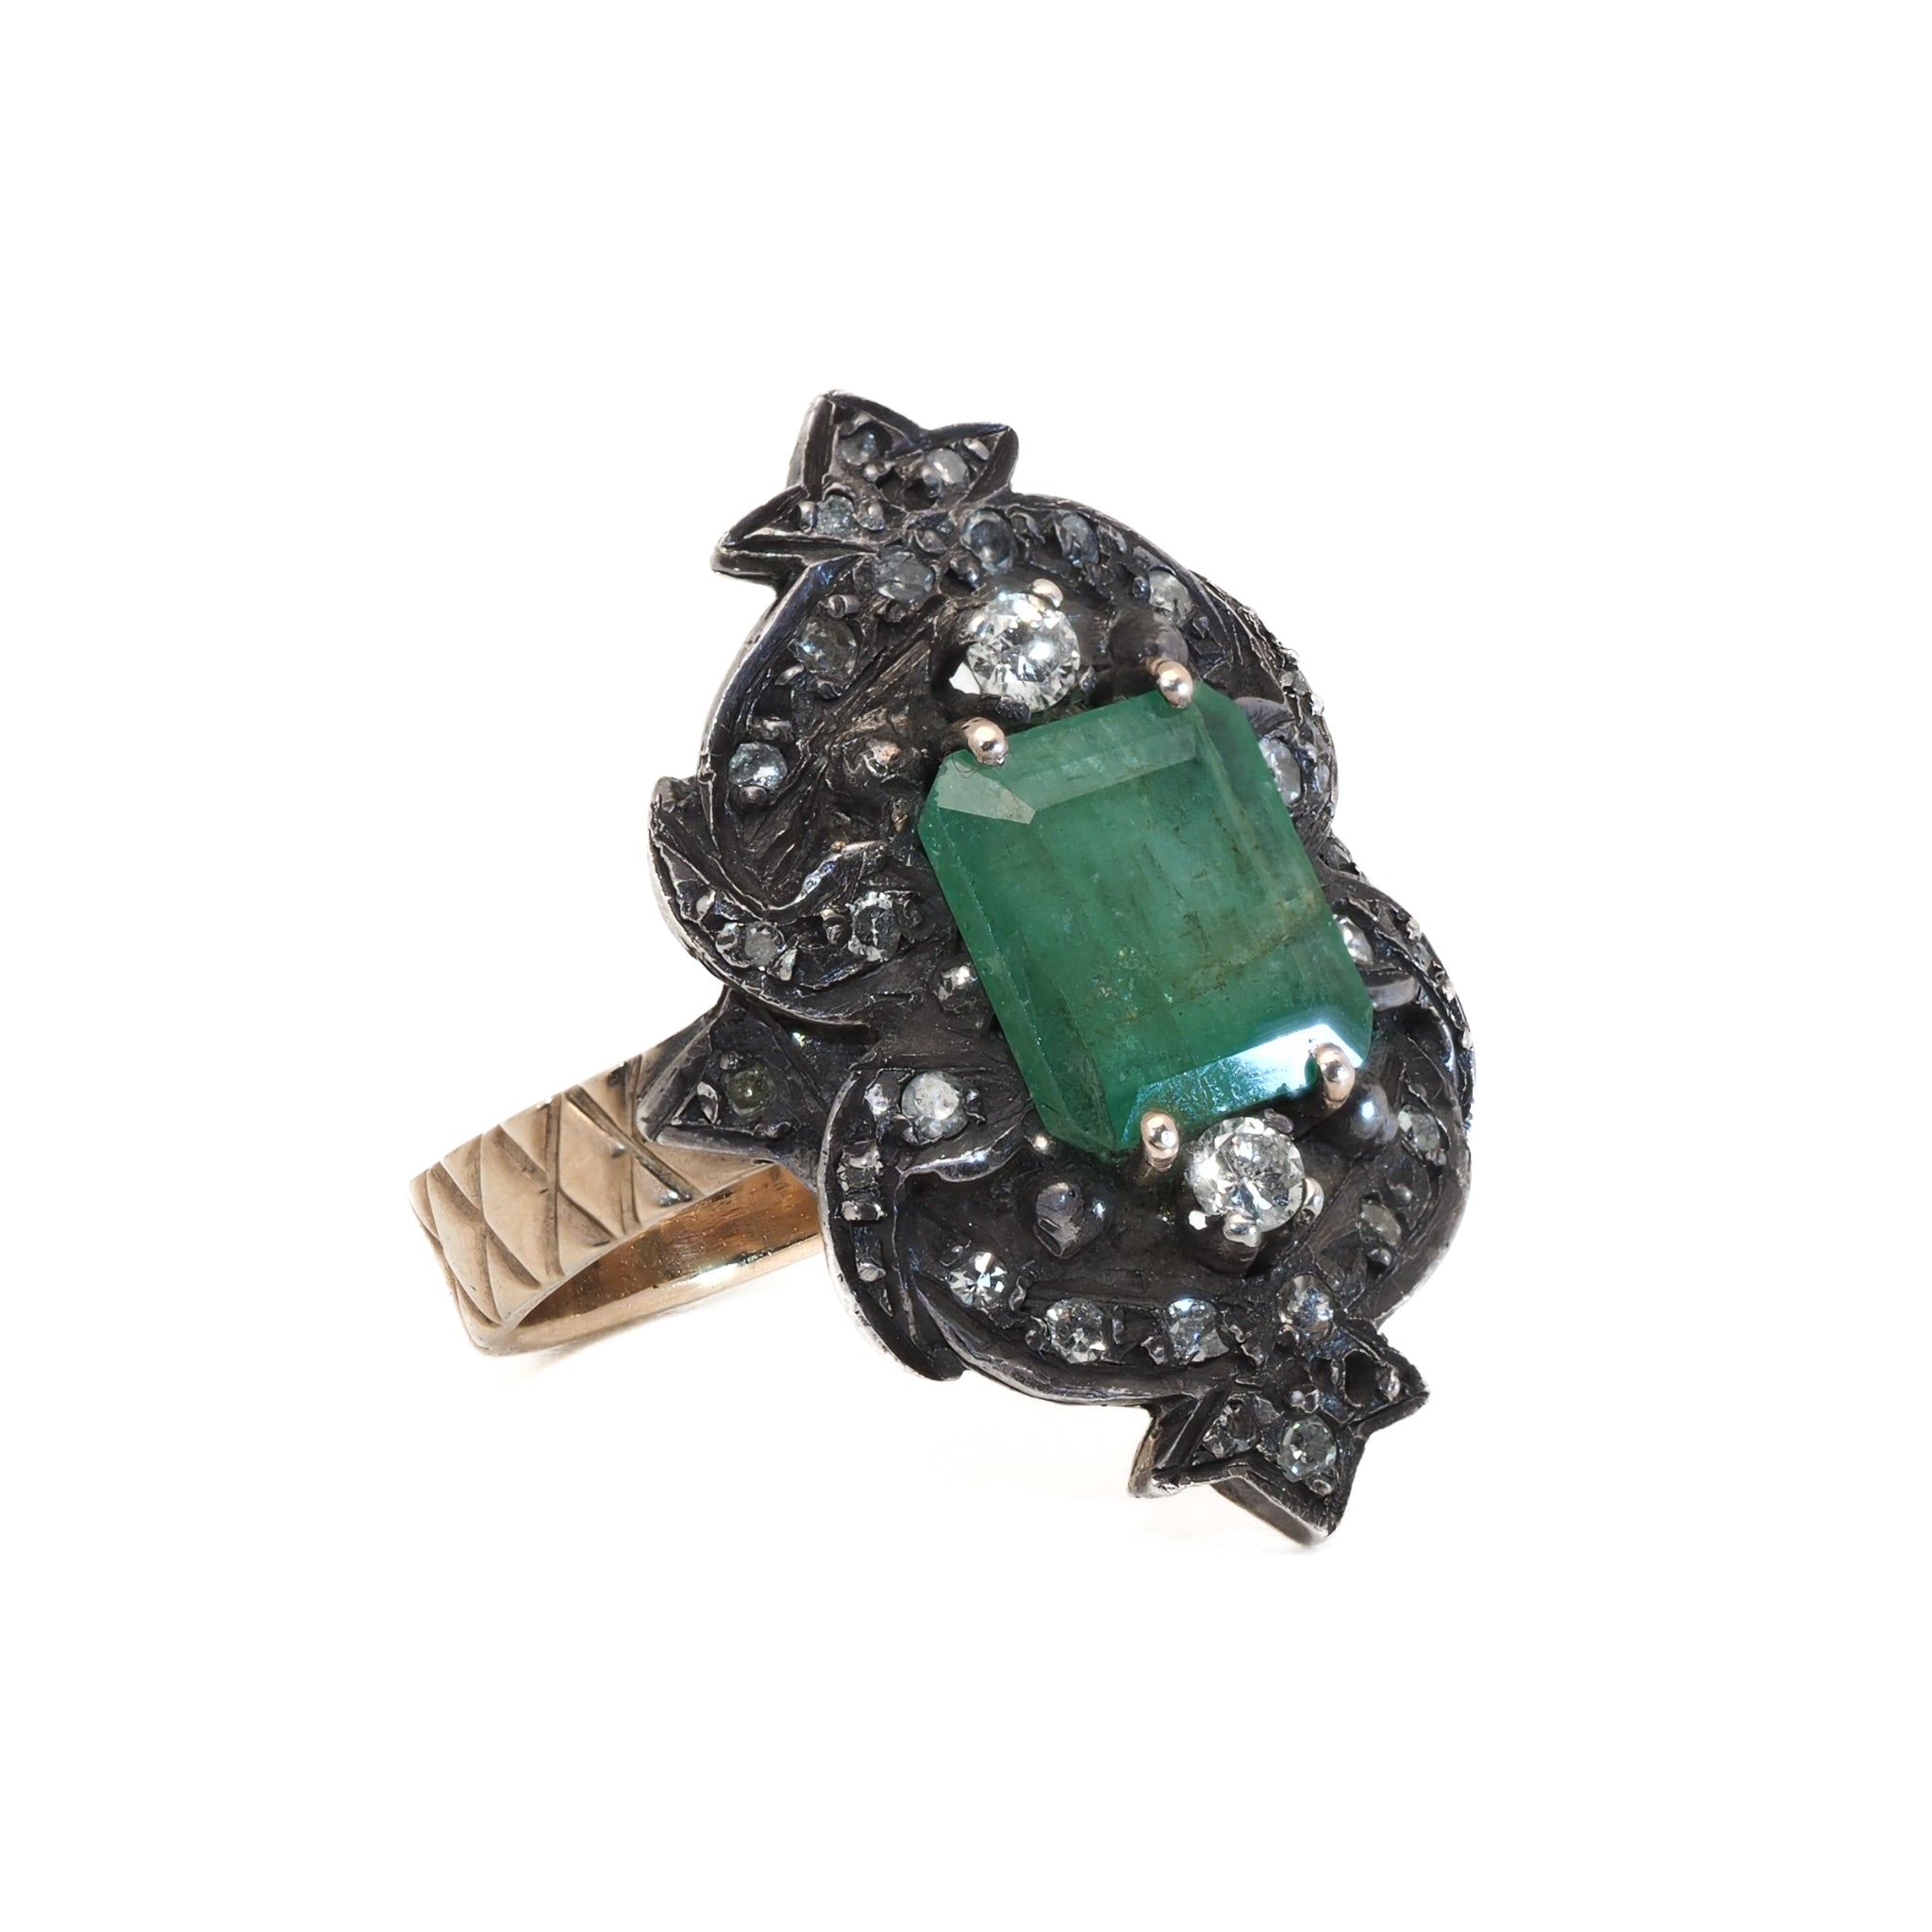 the Emerald Vintage Ring - A beautiful combination of emerald and diamonds, representing love and fidelity, handcrafted to perfection for a unique and meaningful piece of jewelry.